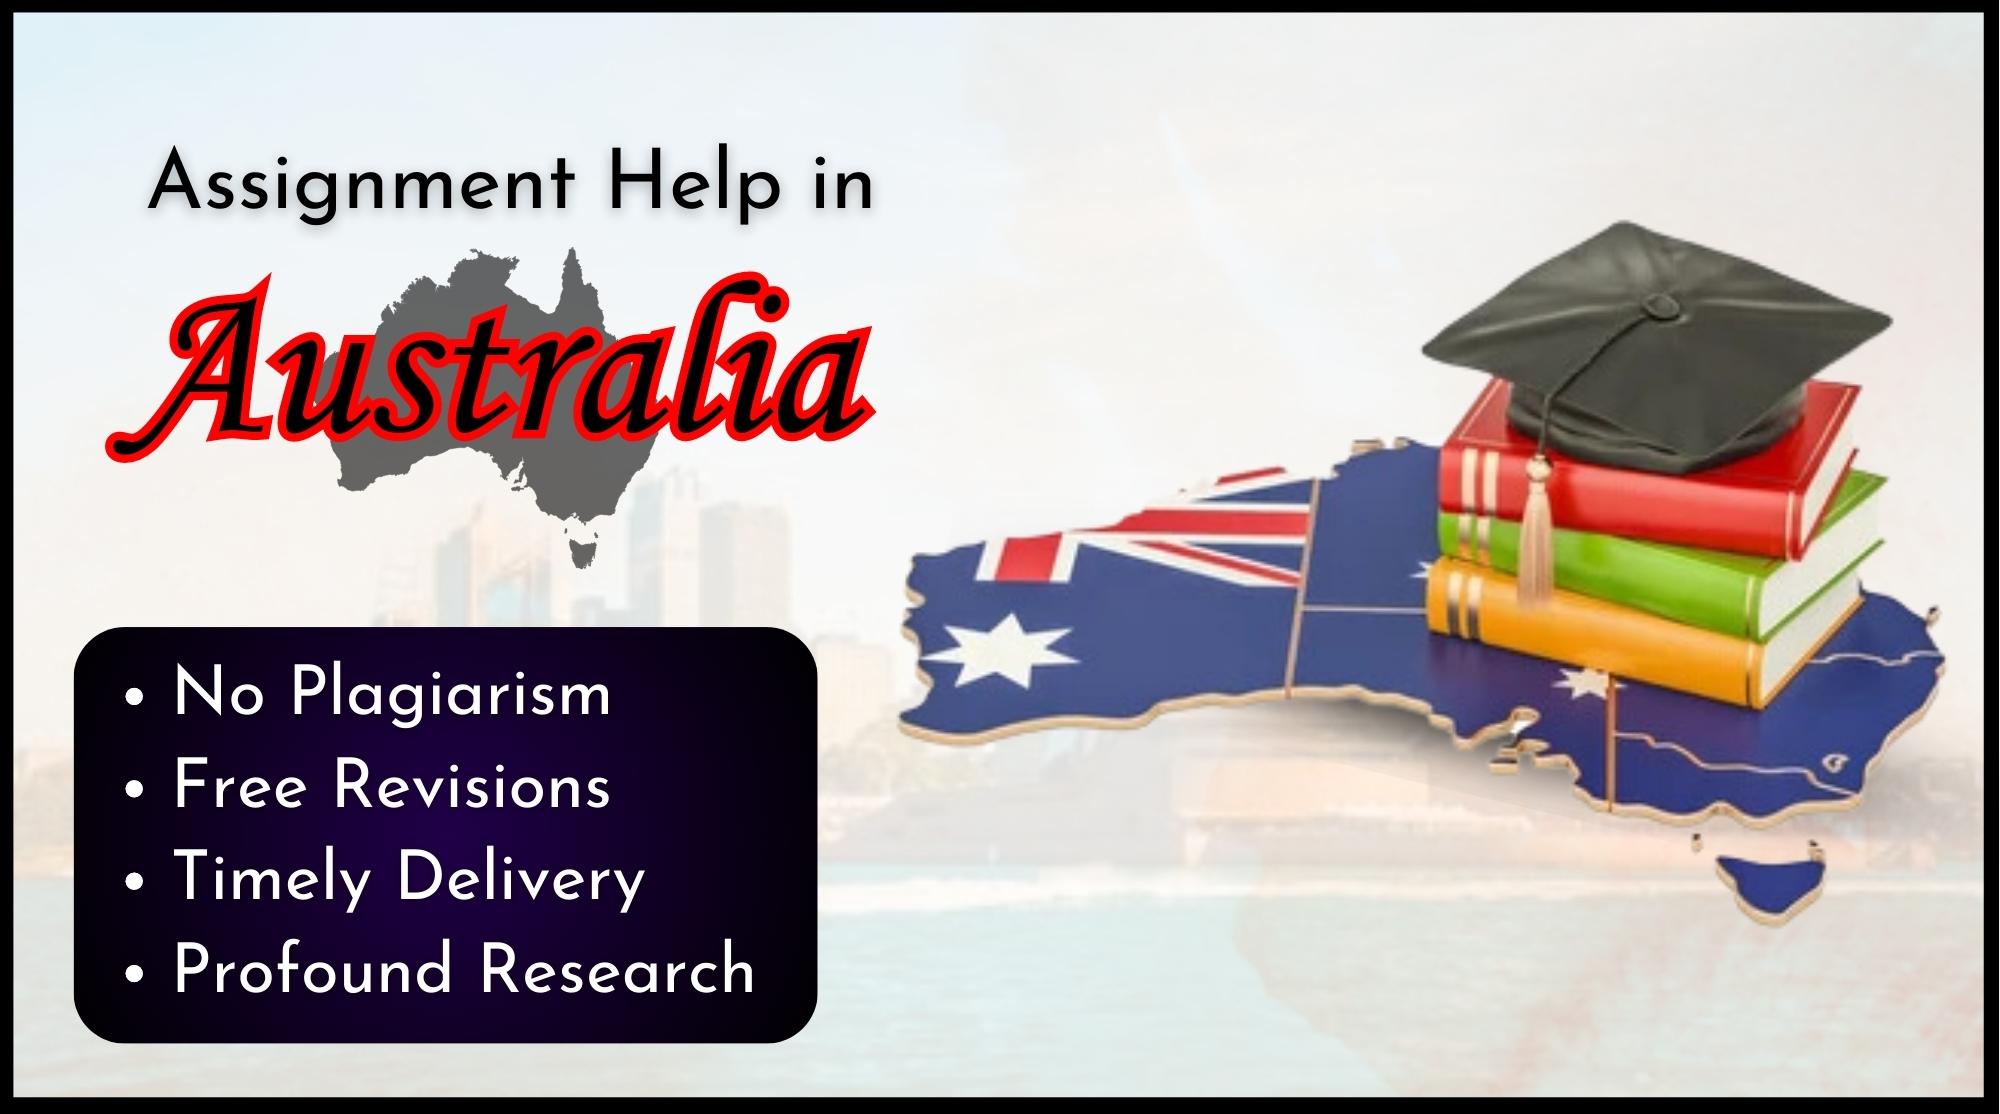 Assignment Help in Australia - No Plagiarism - Free Revisions - Time Delivery - Profound Research